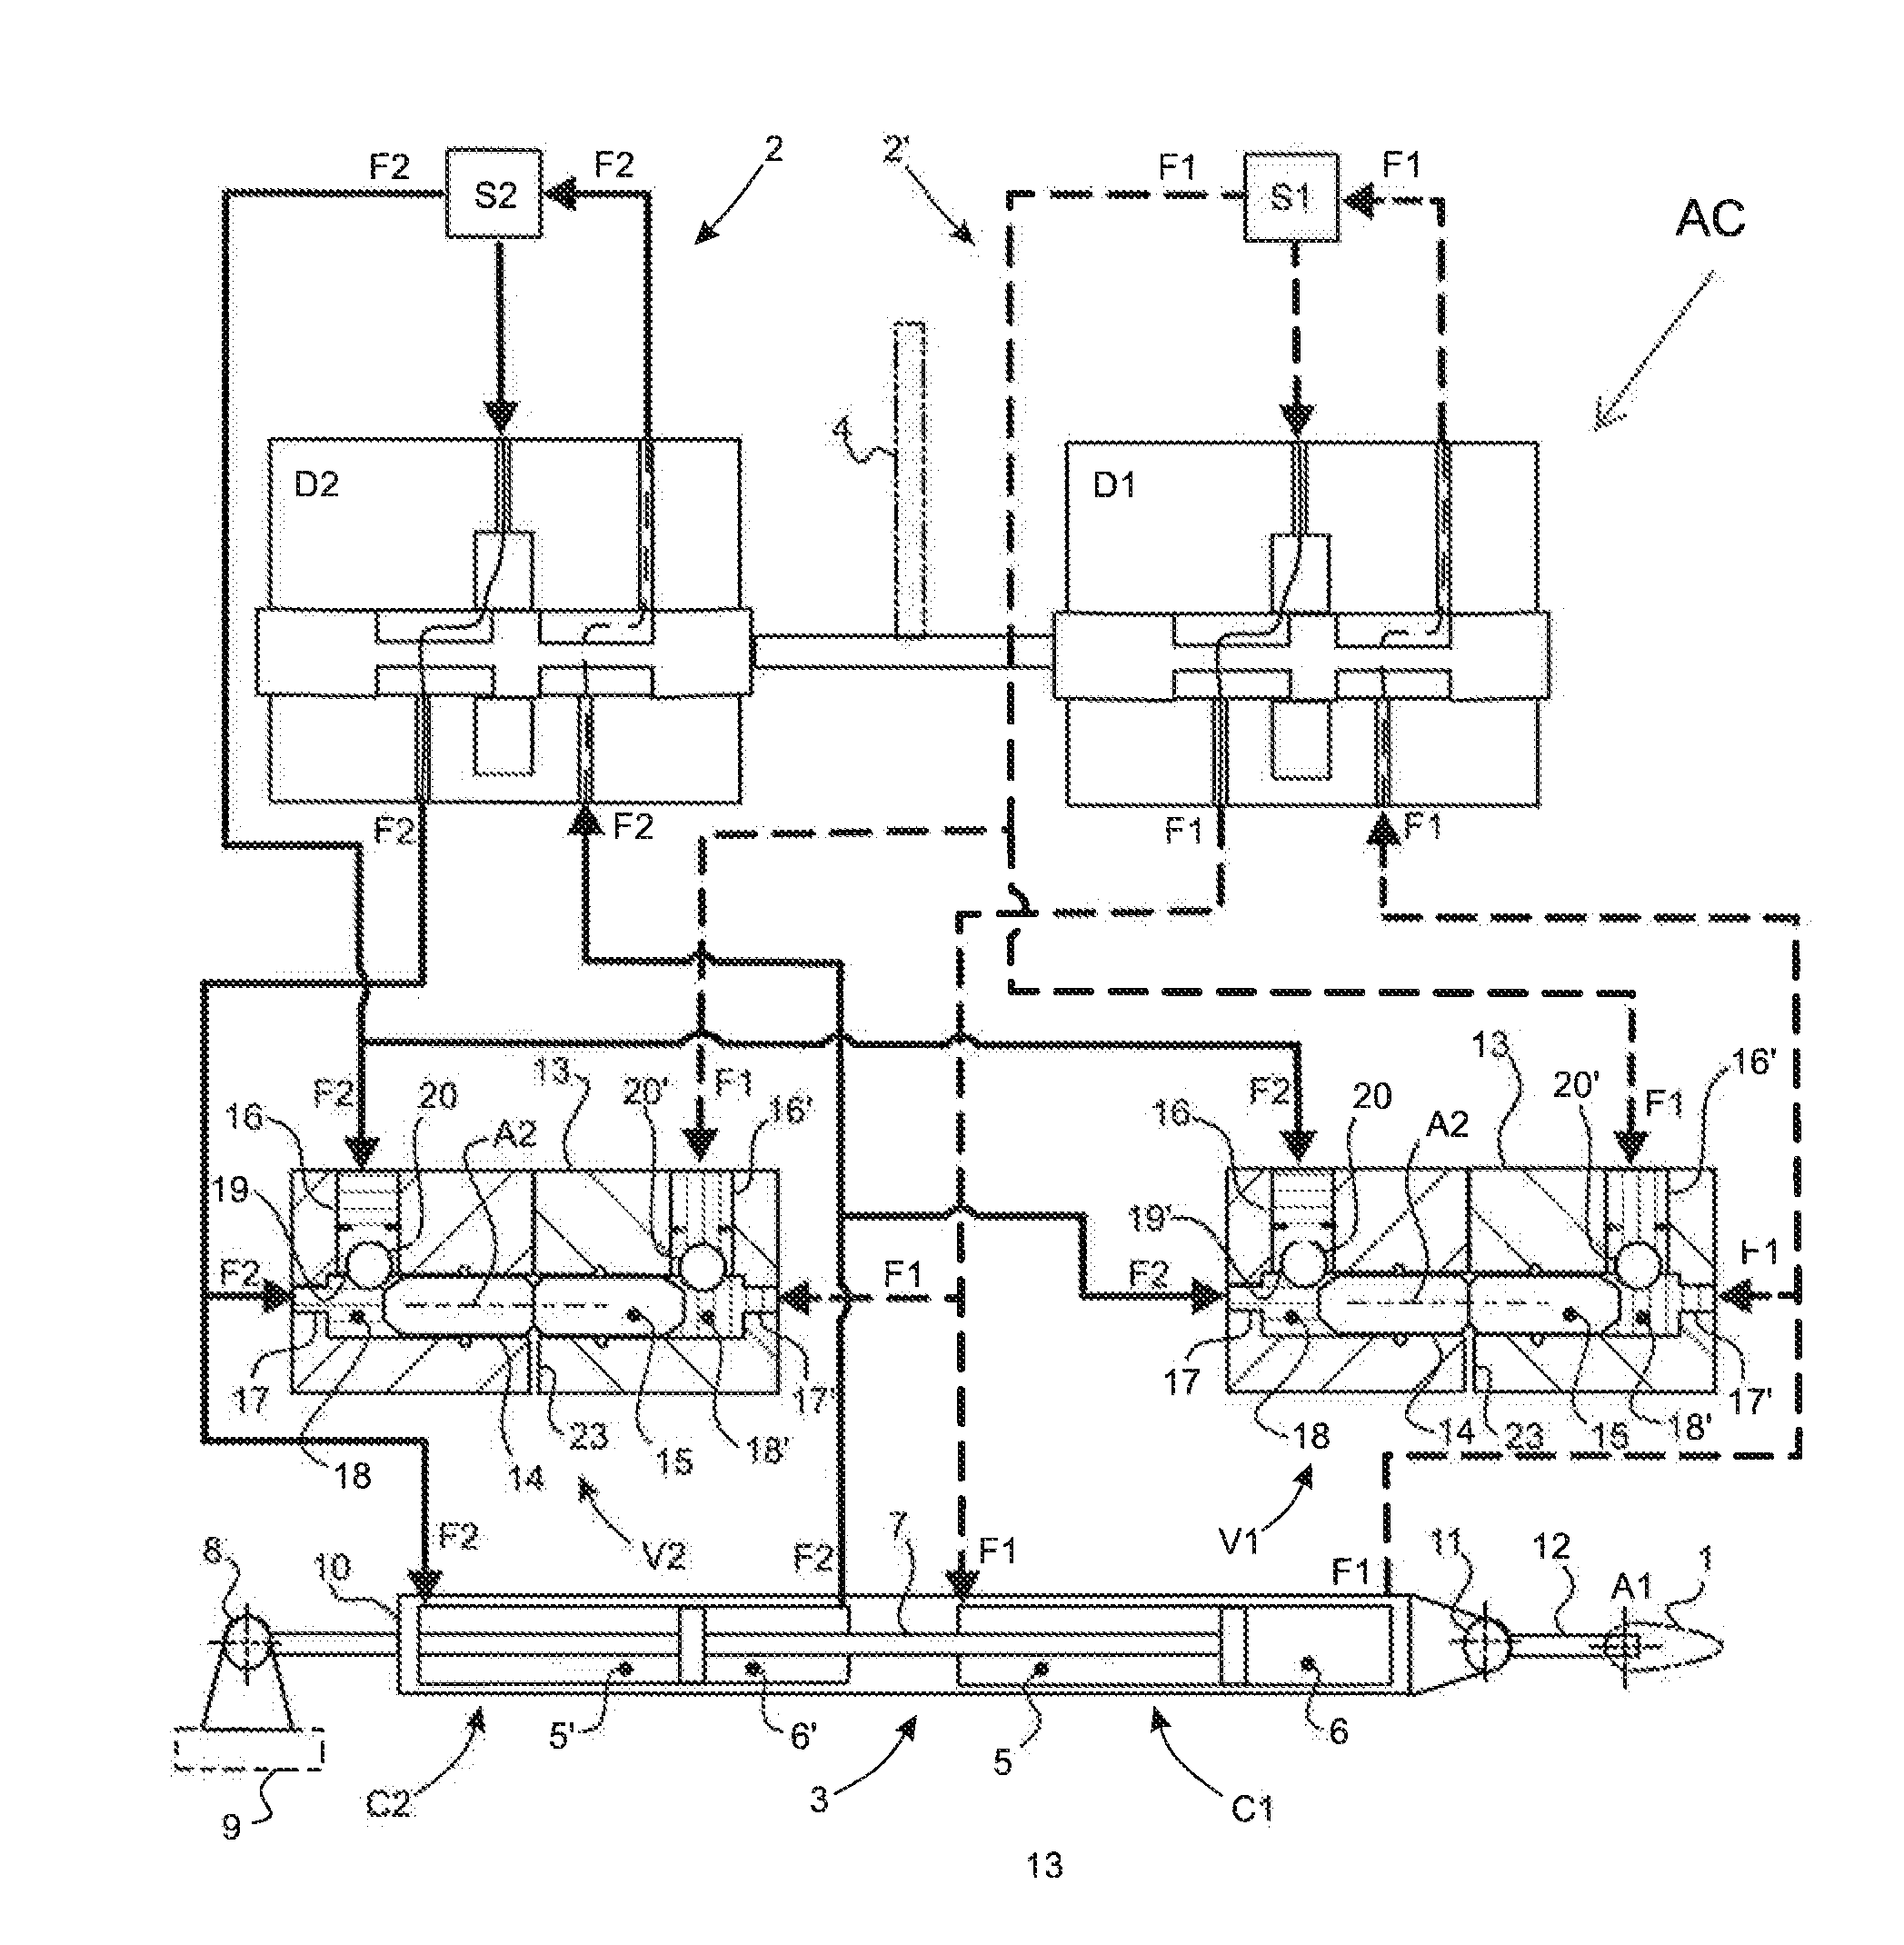 Pressure-balance valve for balancing fluid feed to actuator cylinders of a servo-control for controlling rotor blades of a rotorcraft